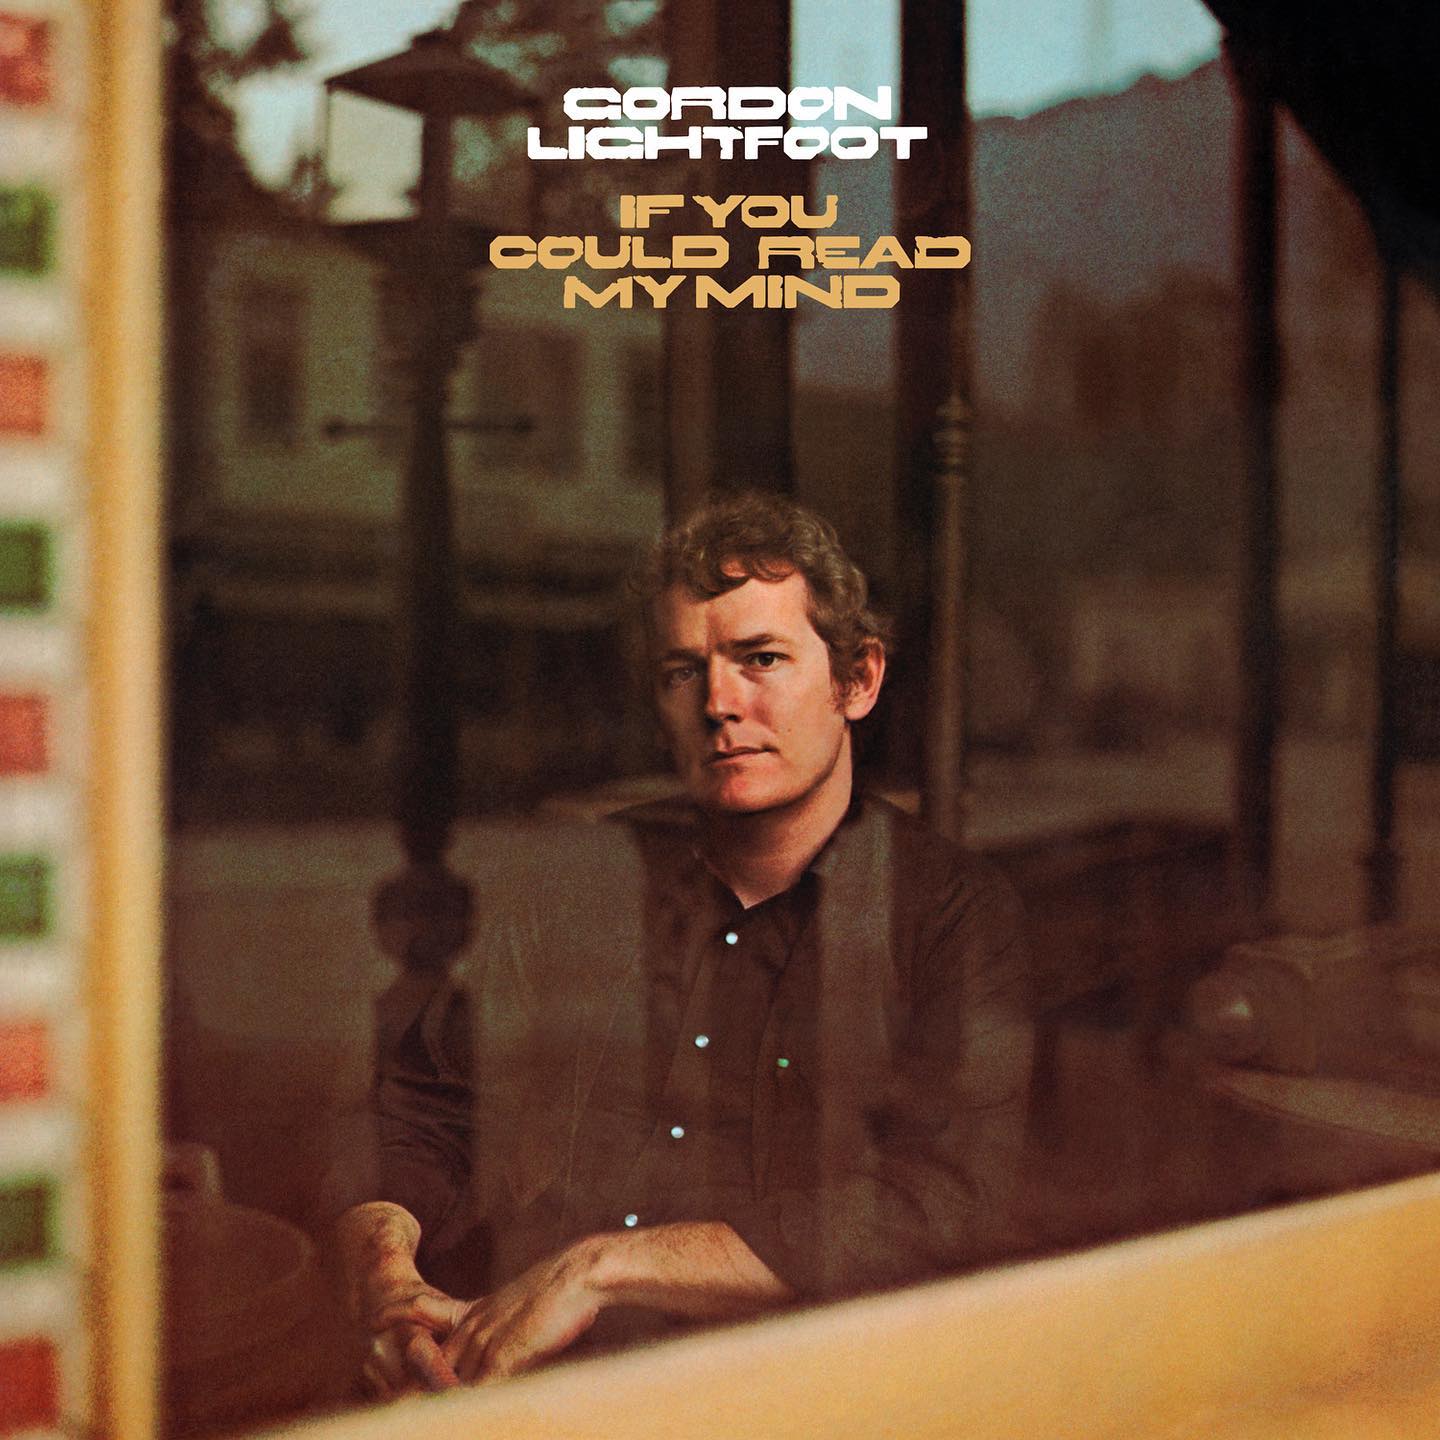 if you could read my mind by gordon lightfoot